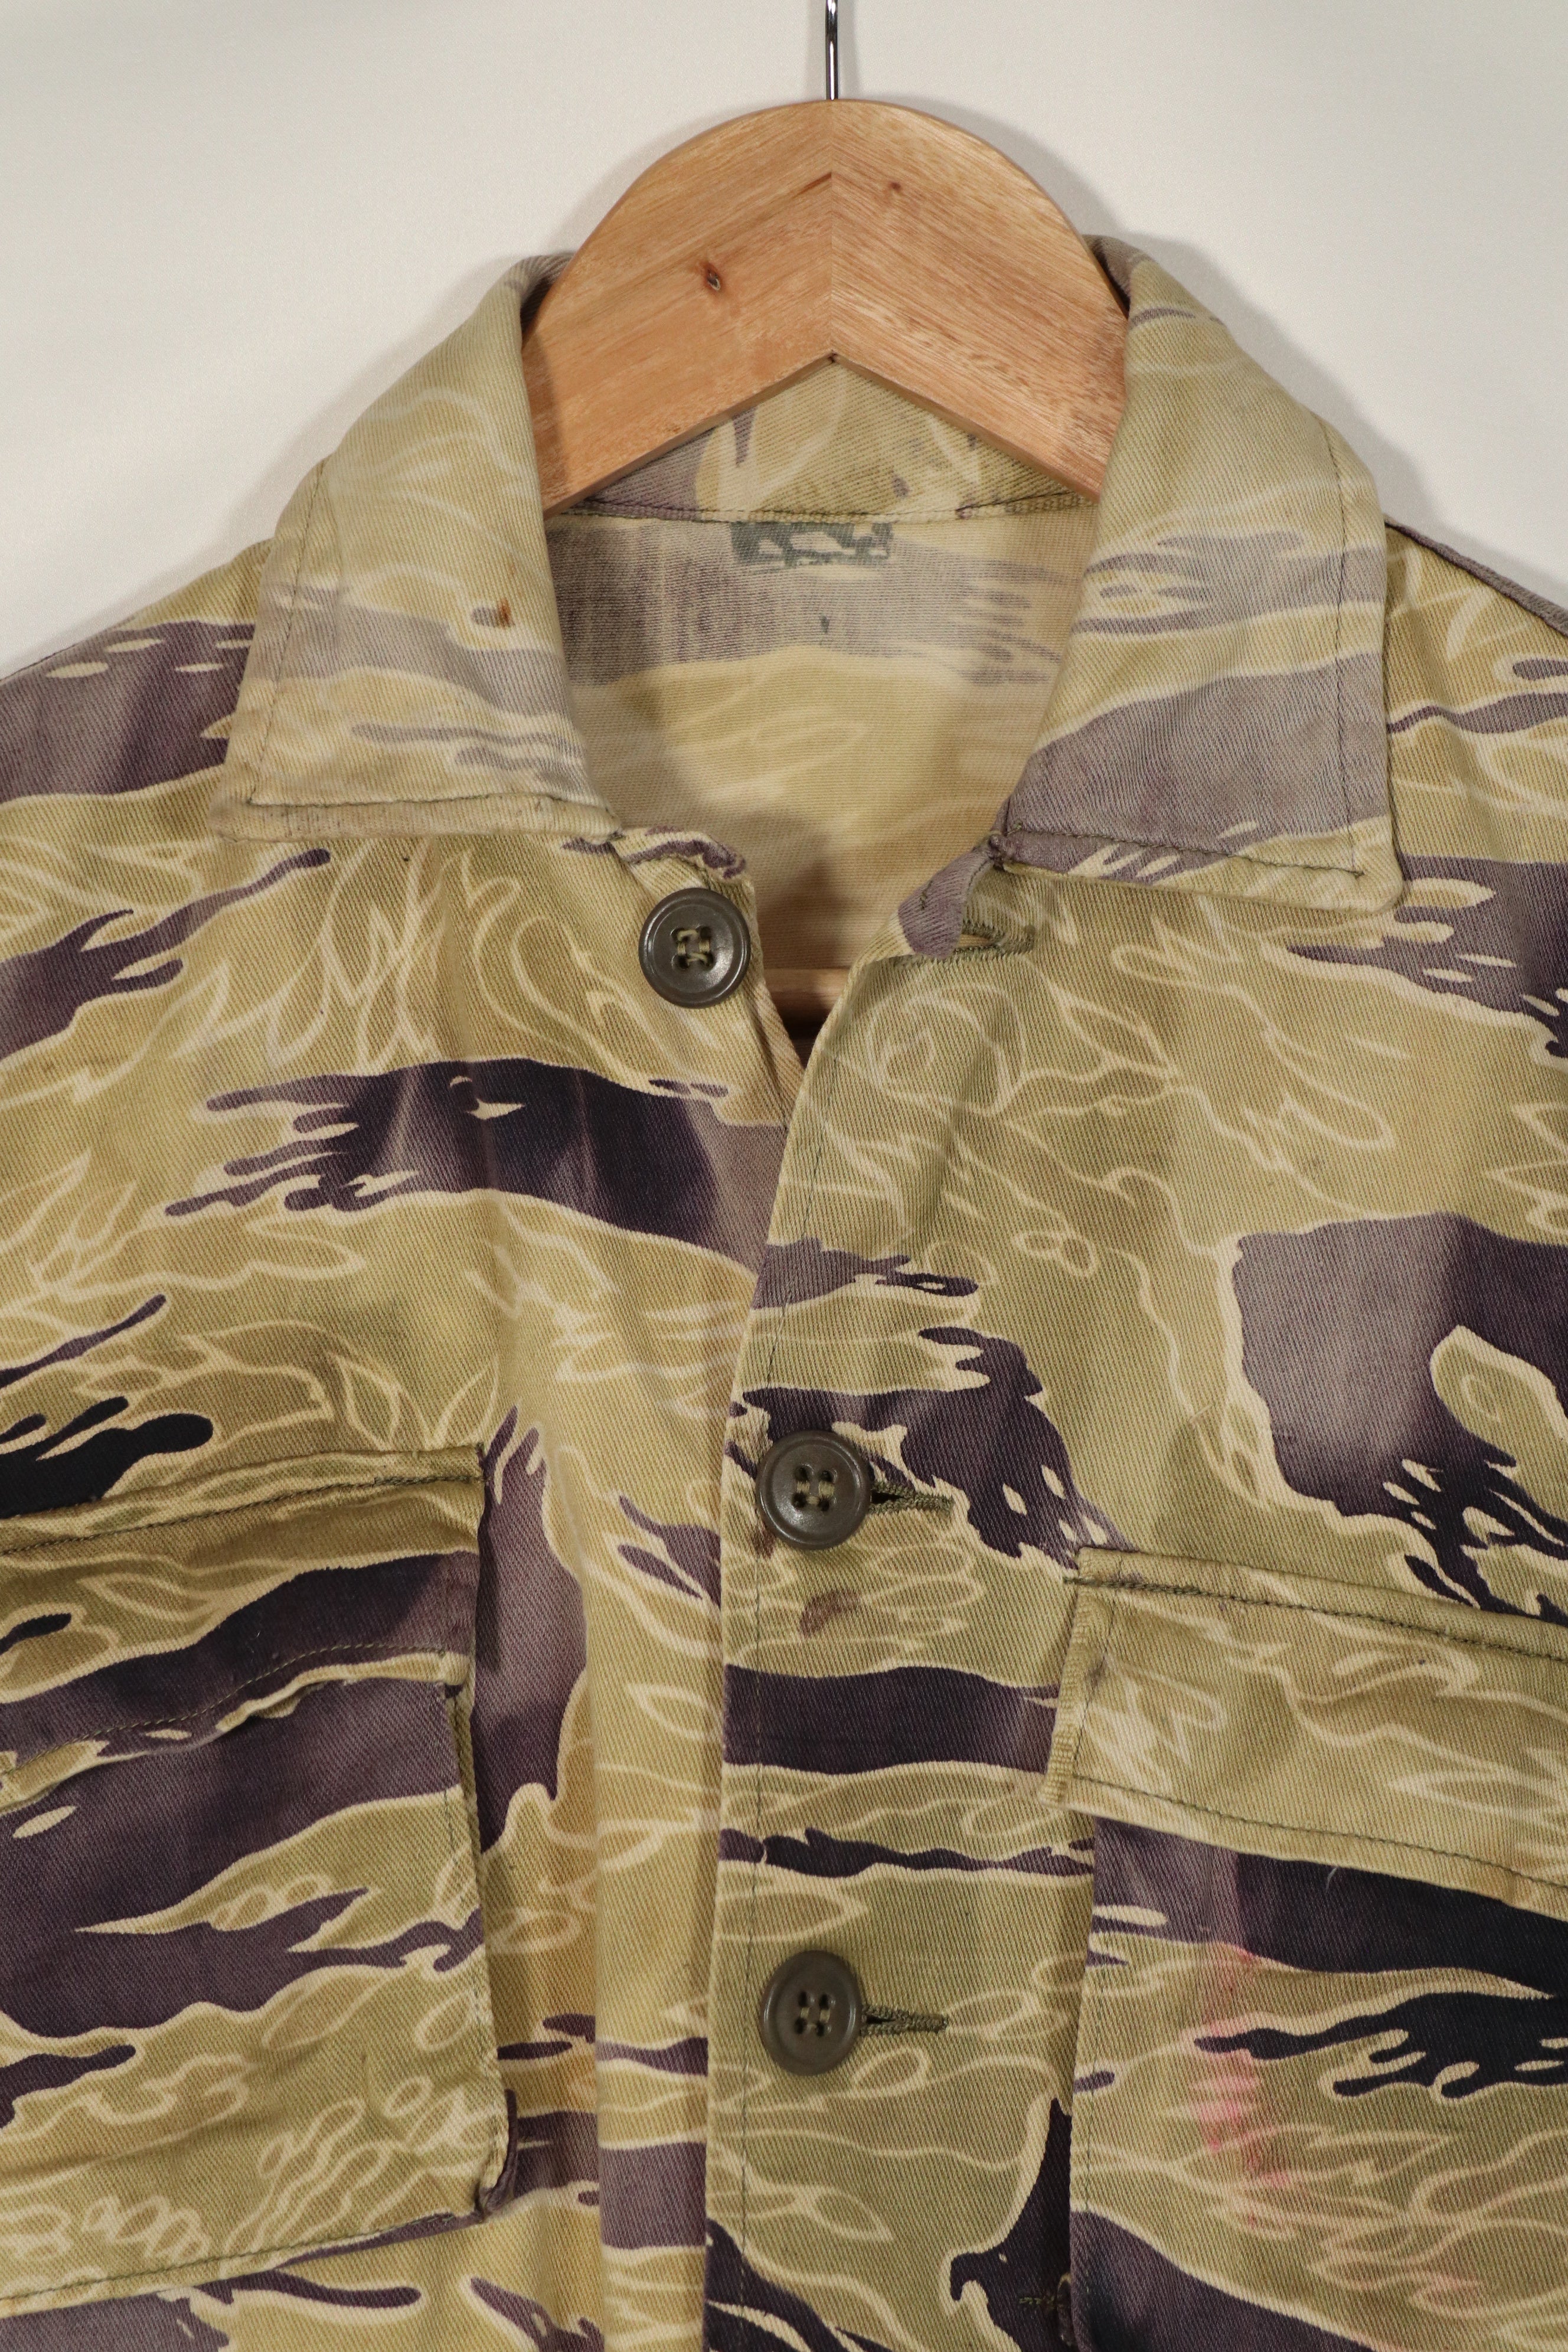 Real Gold Tiger Stripe Shirt Asian Cut A-L Faded Used